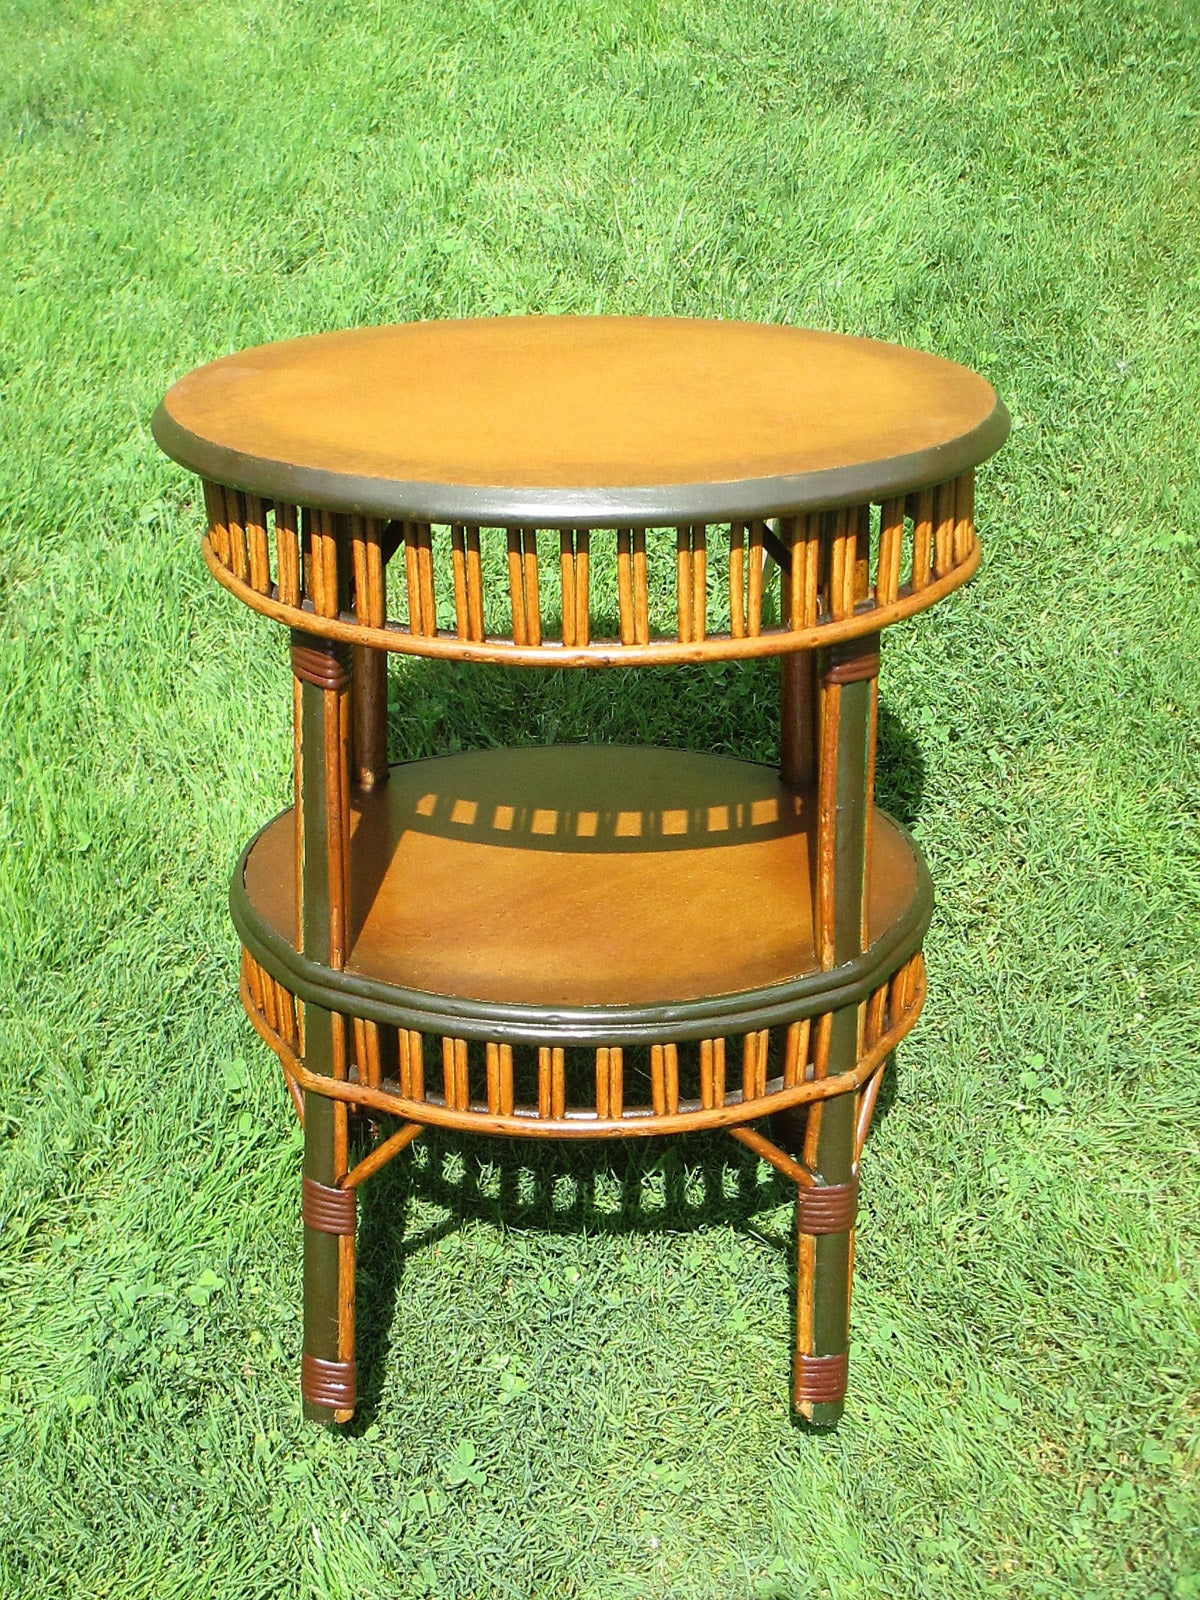 Round Stick Wicker table in original faux-natural finish with dark green glazed trim.  Wood top & bottom shelf with paired reed aprons.  Handy portable tea table height size.